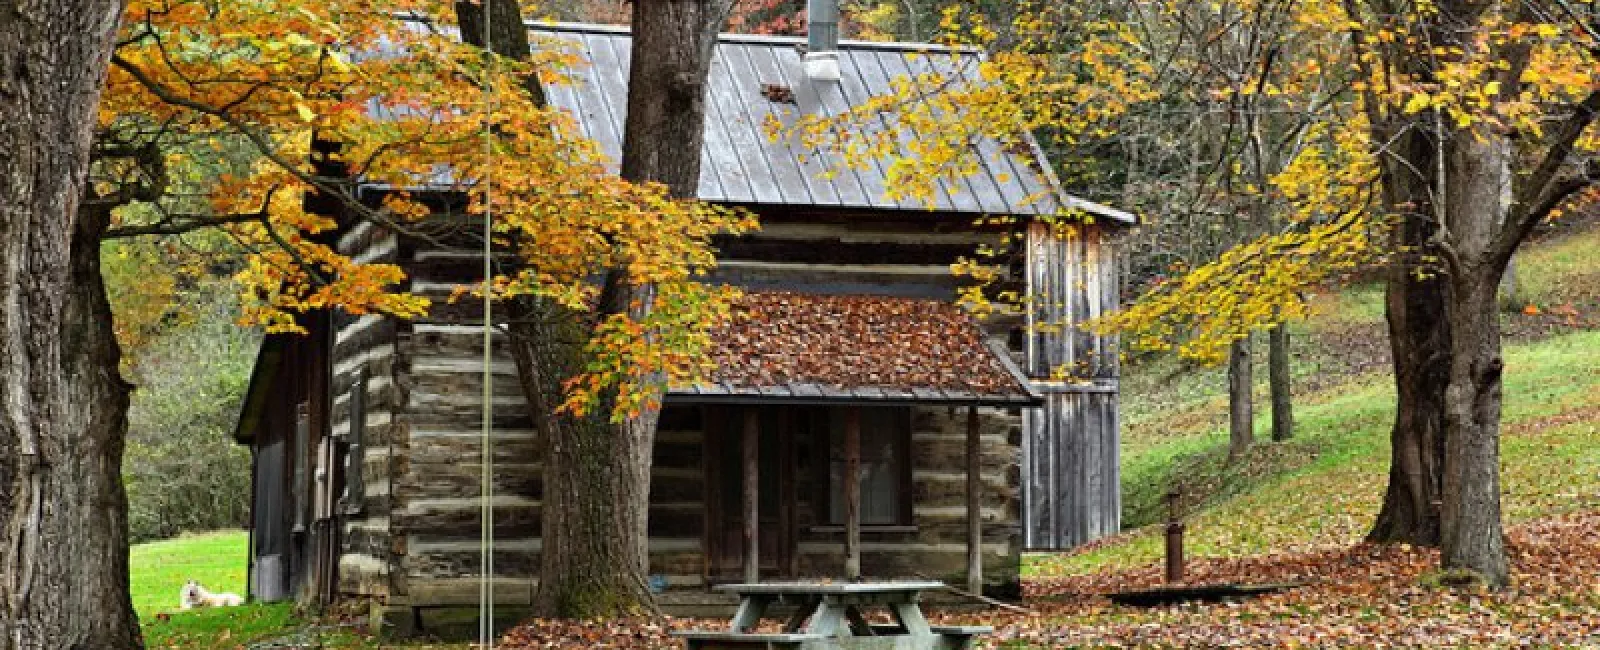 Ideal Roof Styles For Your Georgia Cabin